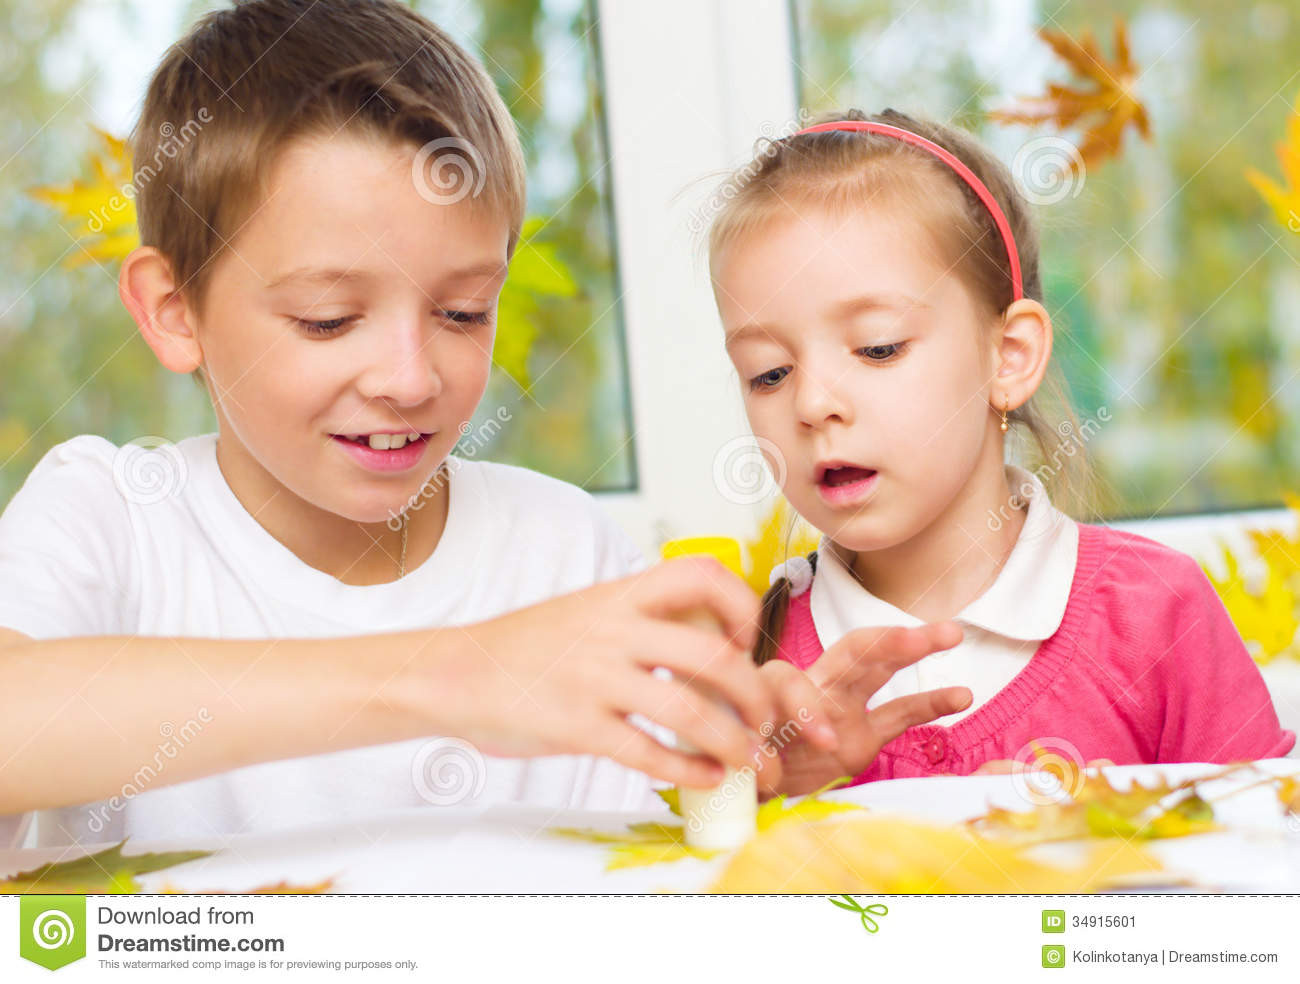 Kids Doing Crafts
 Children Doing Arts And Crafts Stock Image Image of